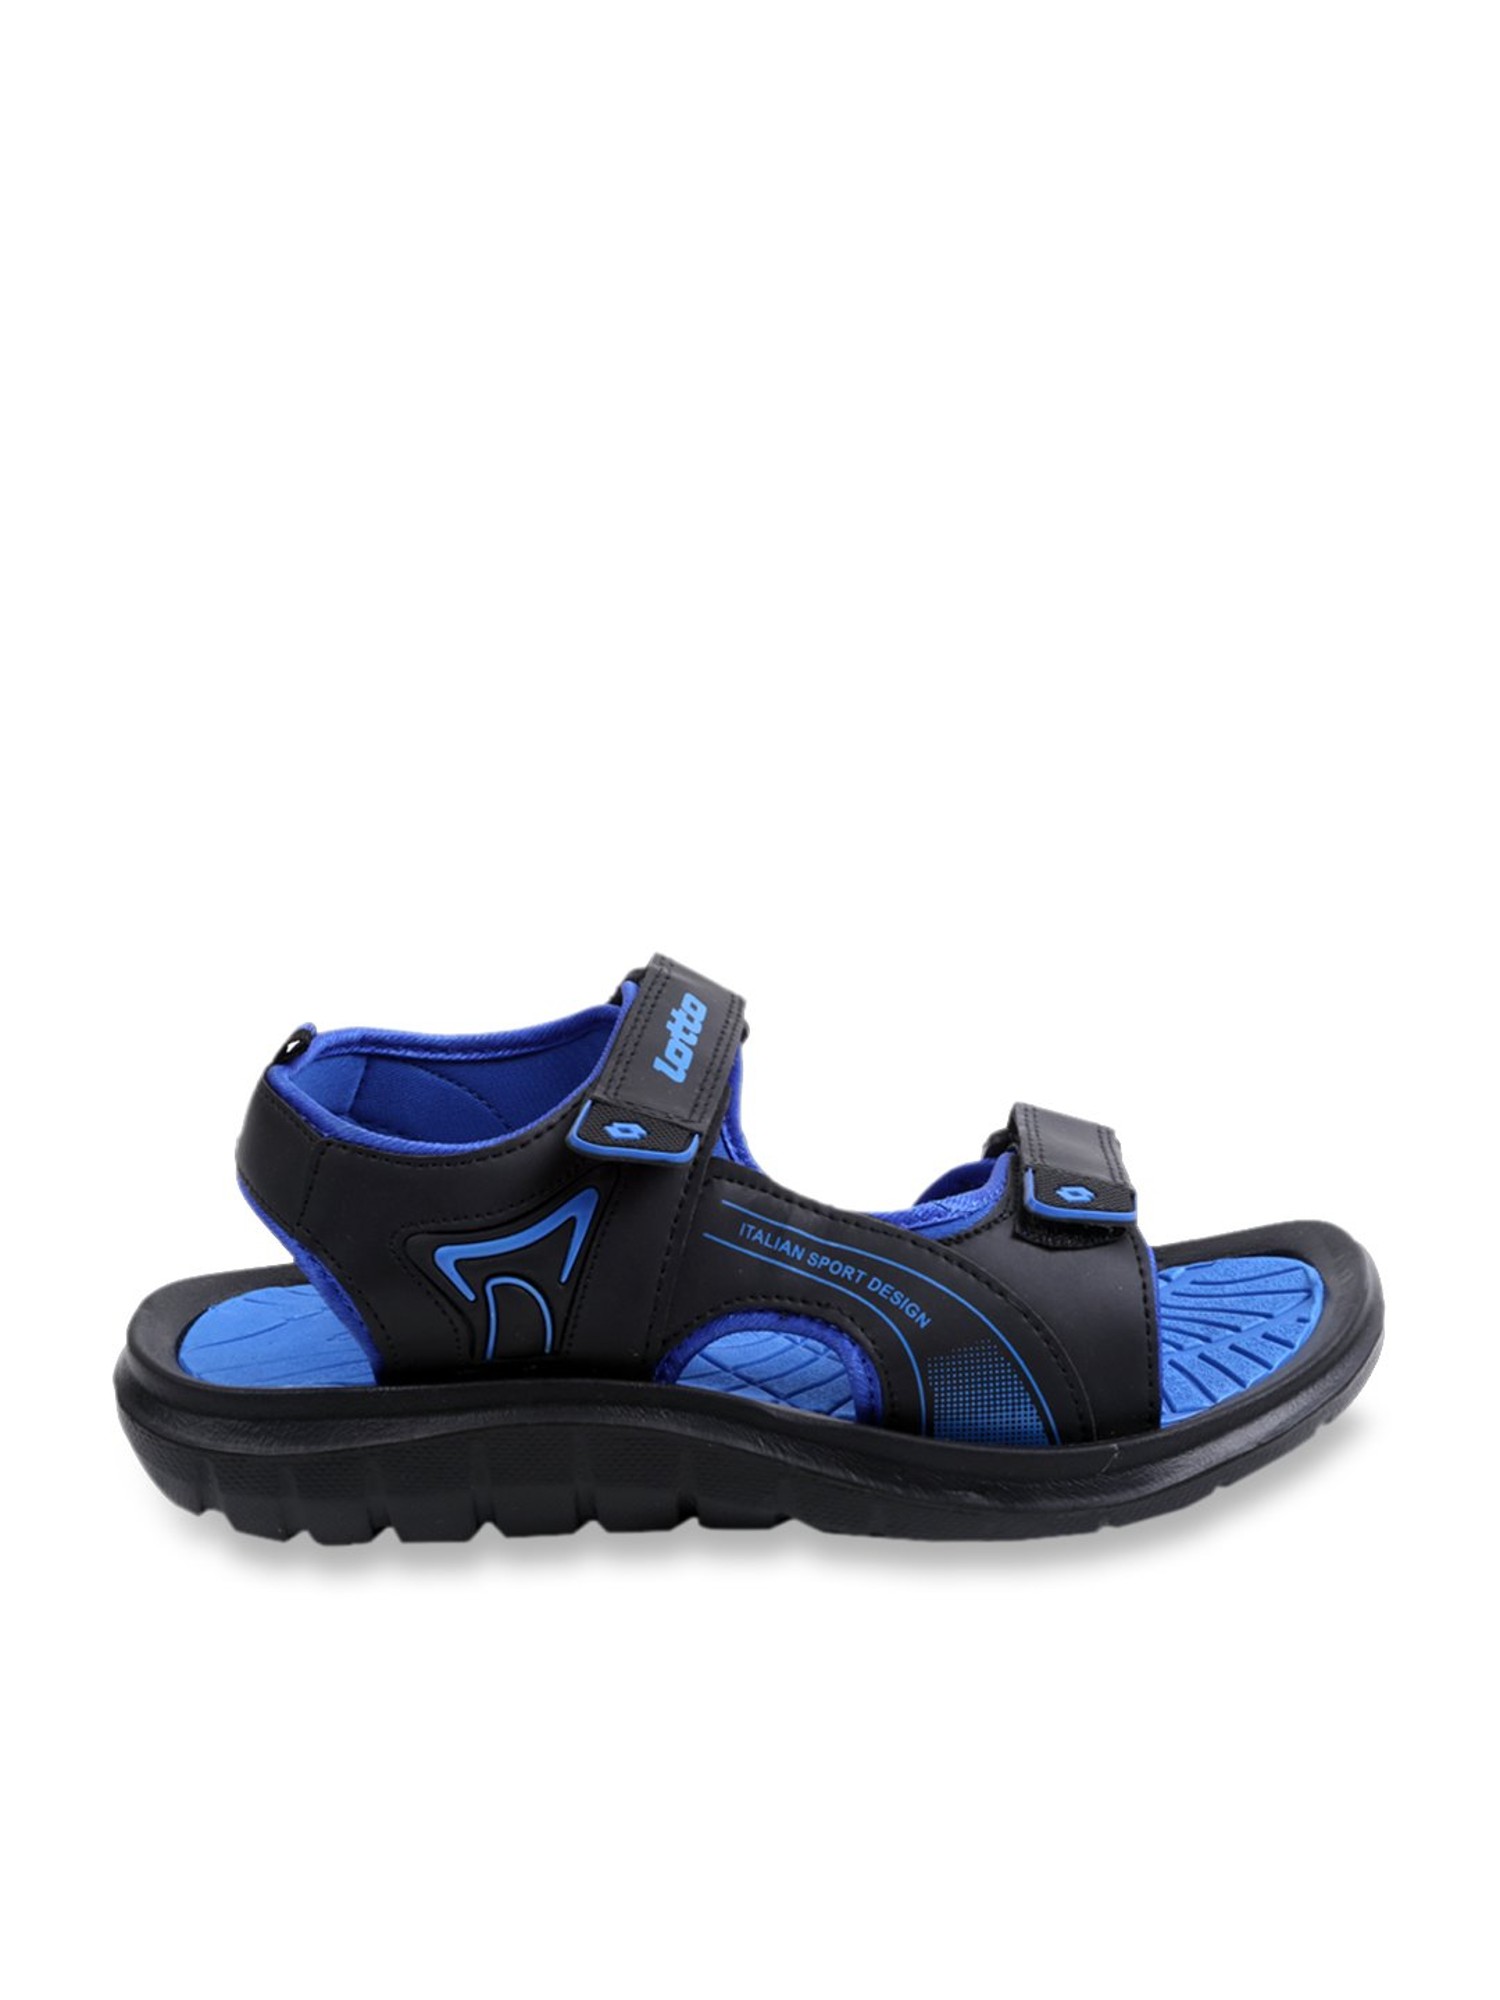 Buy LOTTO Sandals for Women Girls  Rs274 Only From Ebay MRP Rs 499